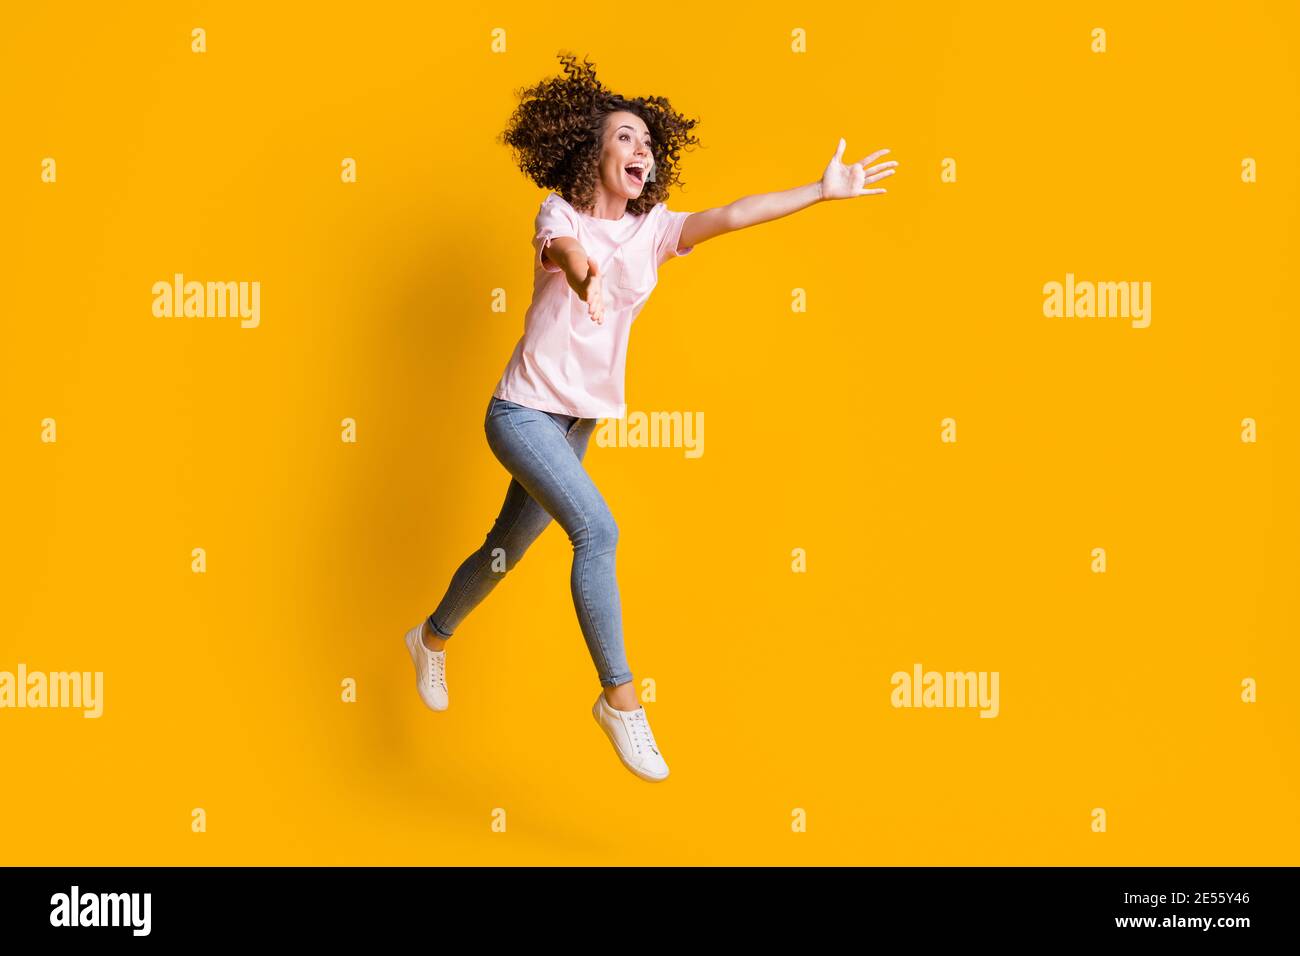 Photo portrait full body view of woman catching running jumping up isolated on vivid yellow colored background Stock Photo